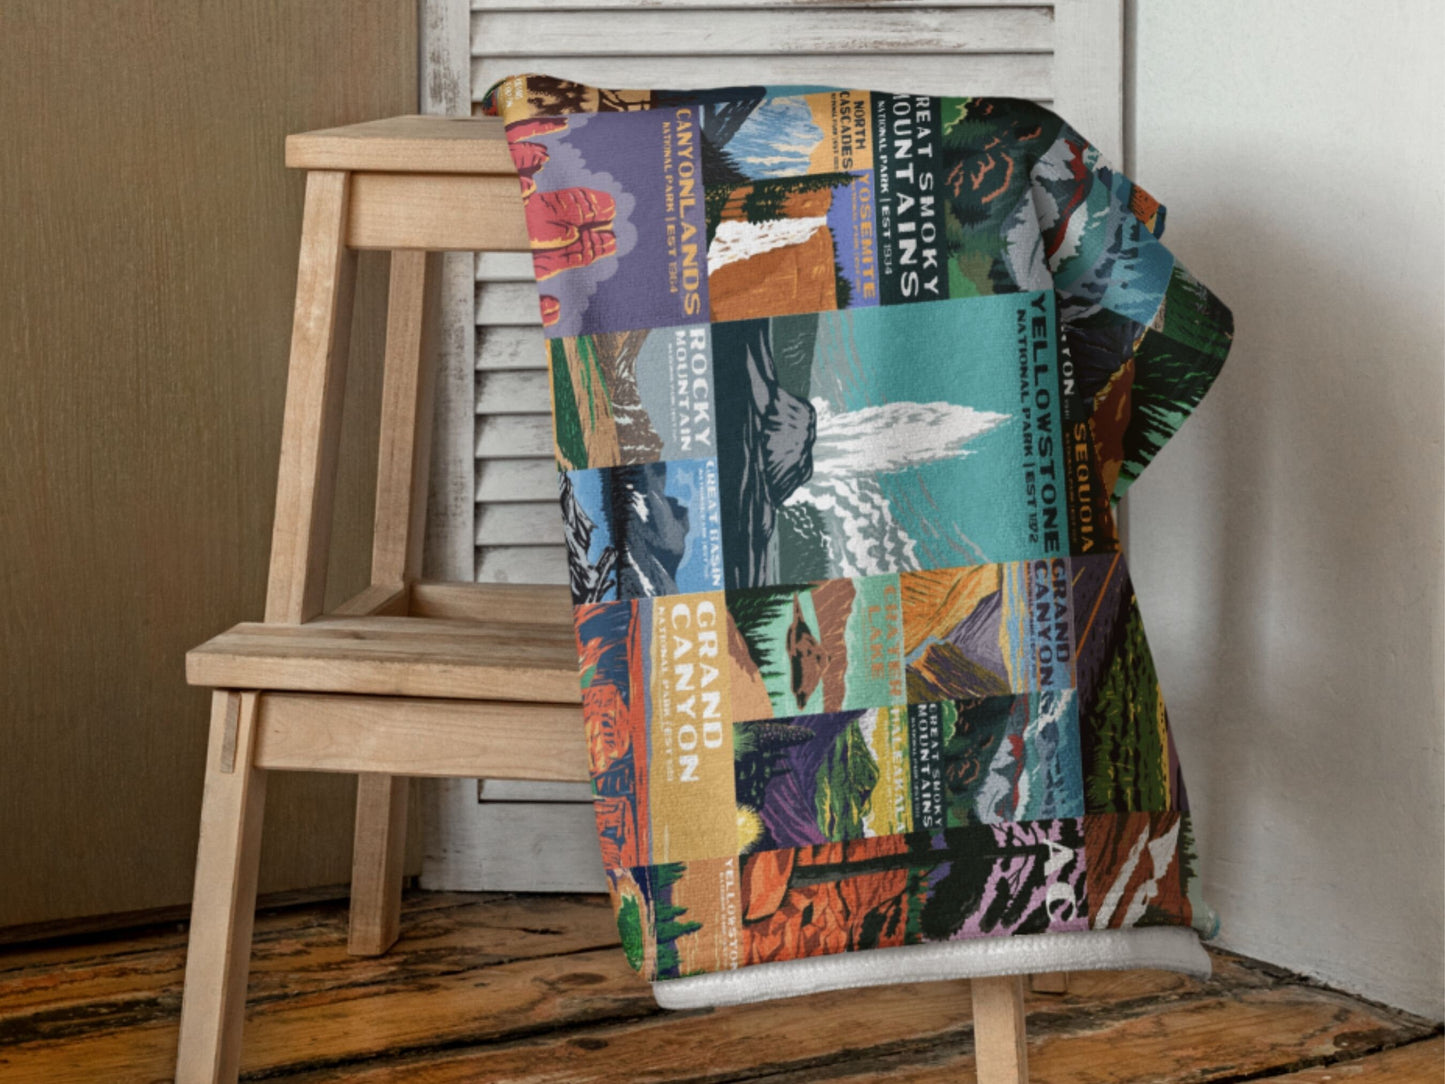 National Park Beach TowelBeach days are always a bliss – showing up with a luxuriously soft and beach towel featuring all your favorite national parks can add a bit more sunshine to your day